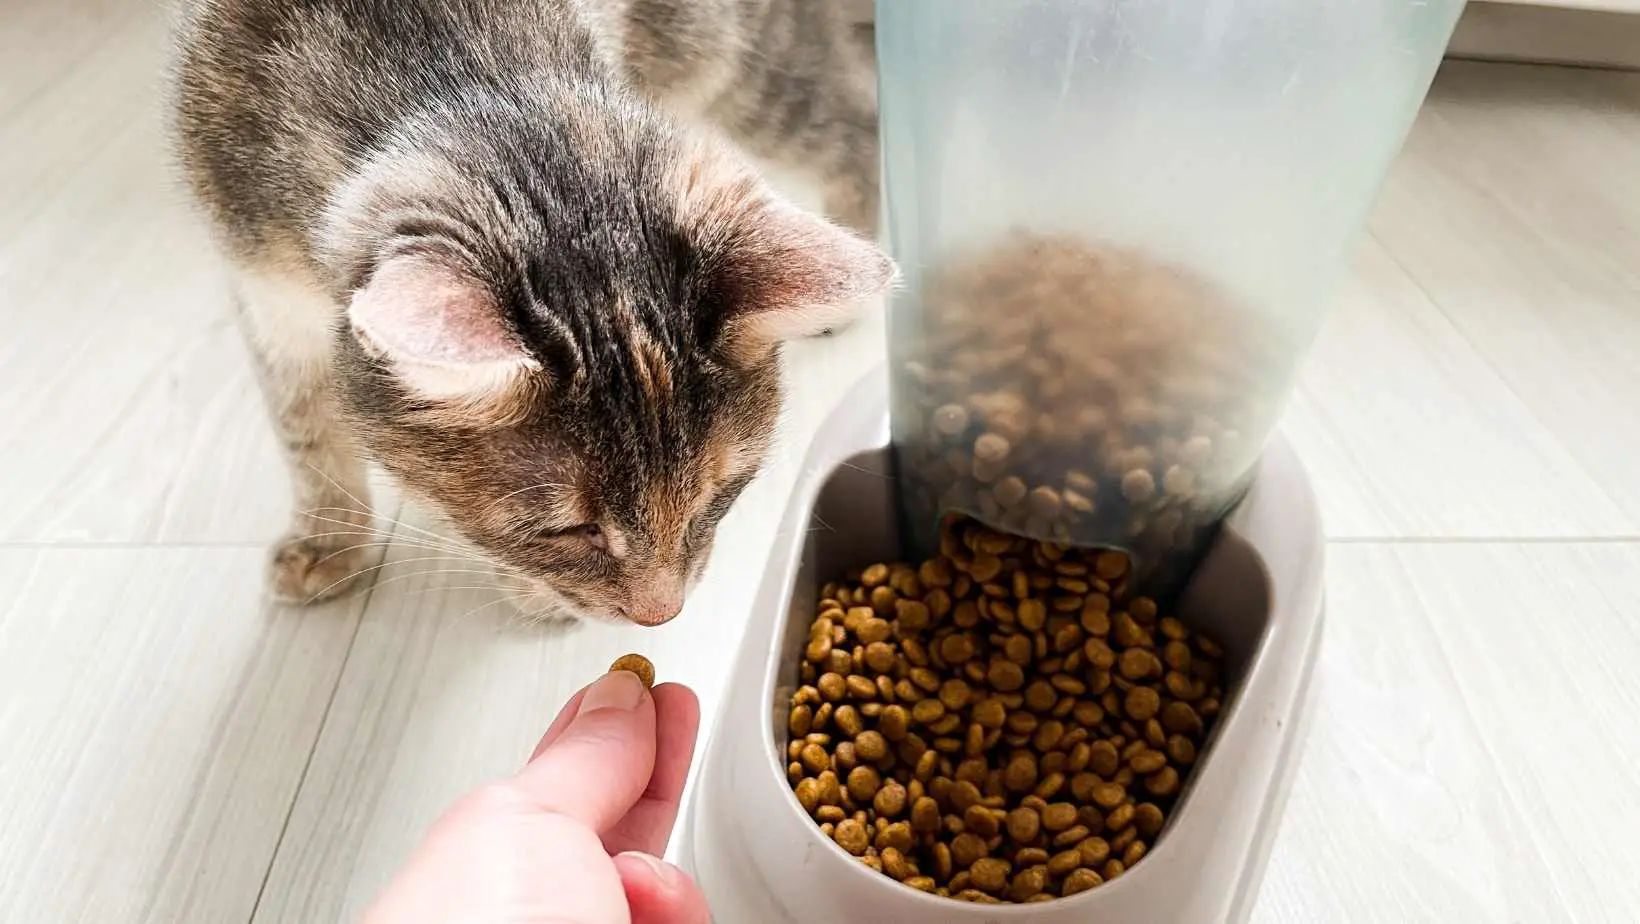 What to feed a sick cat that won’t eat? The best ways to eat